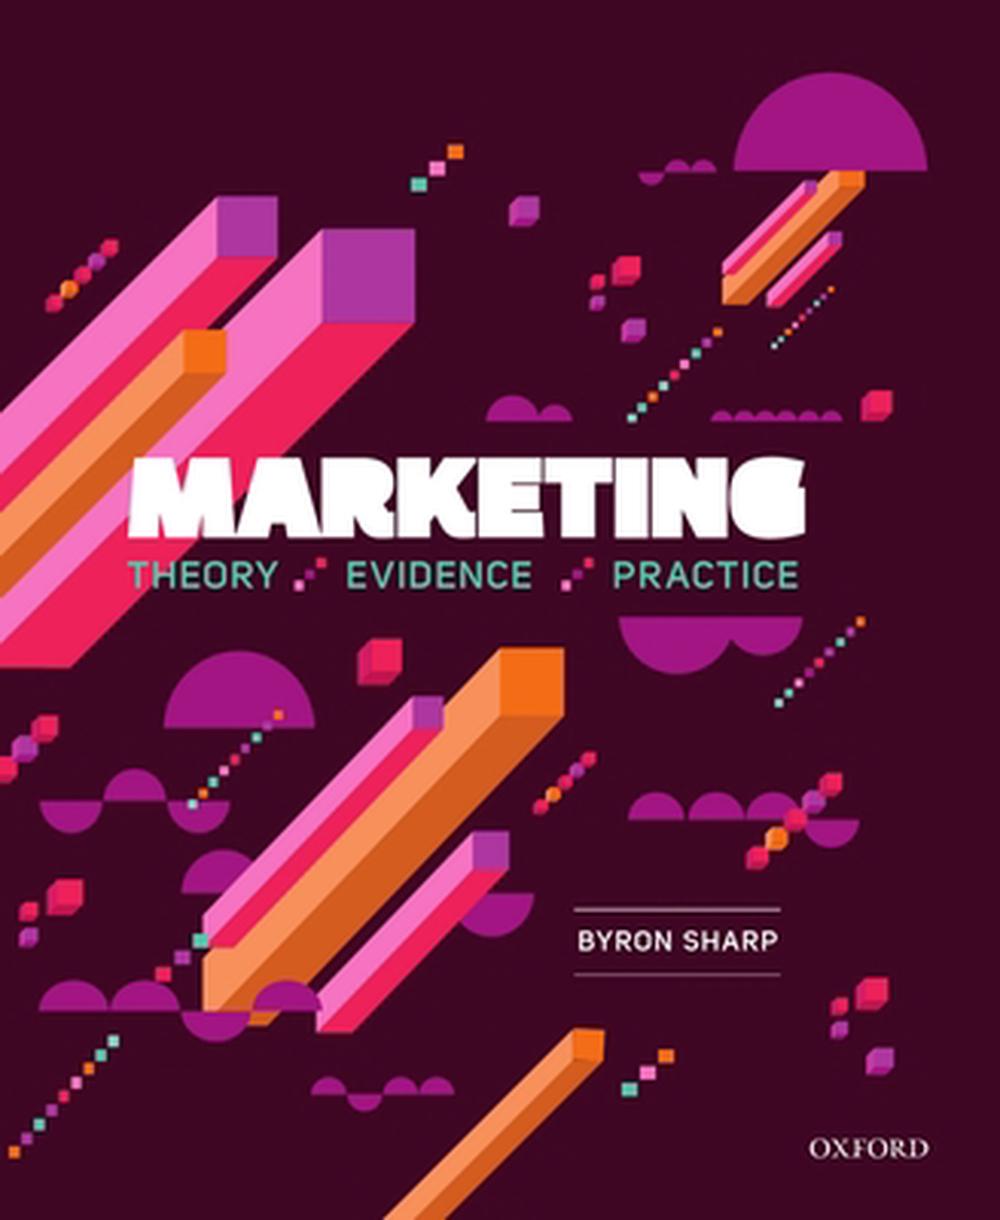 Marketing Theory, Evidence, Practice by Byron Sharp, Paperback, 9780195573558 Buy online at